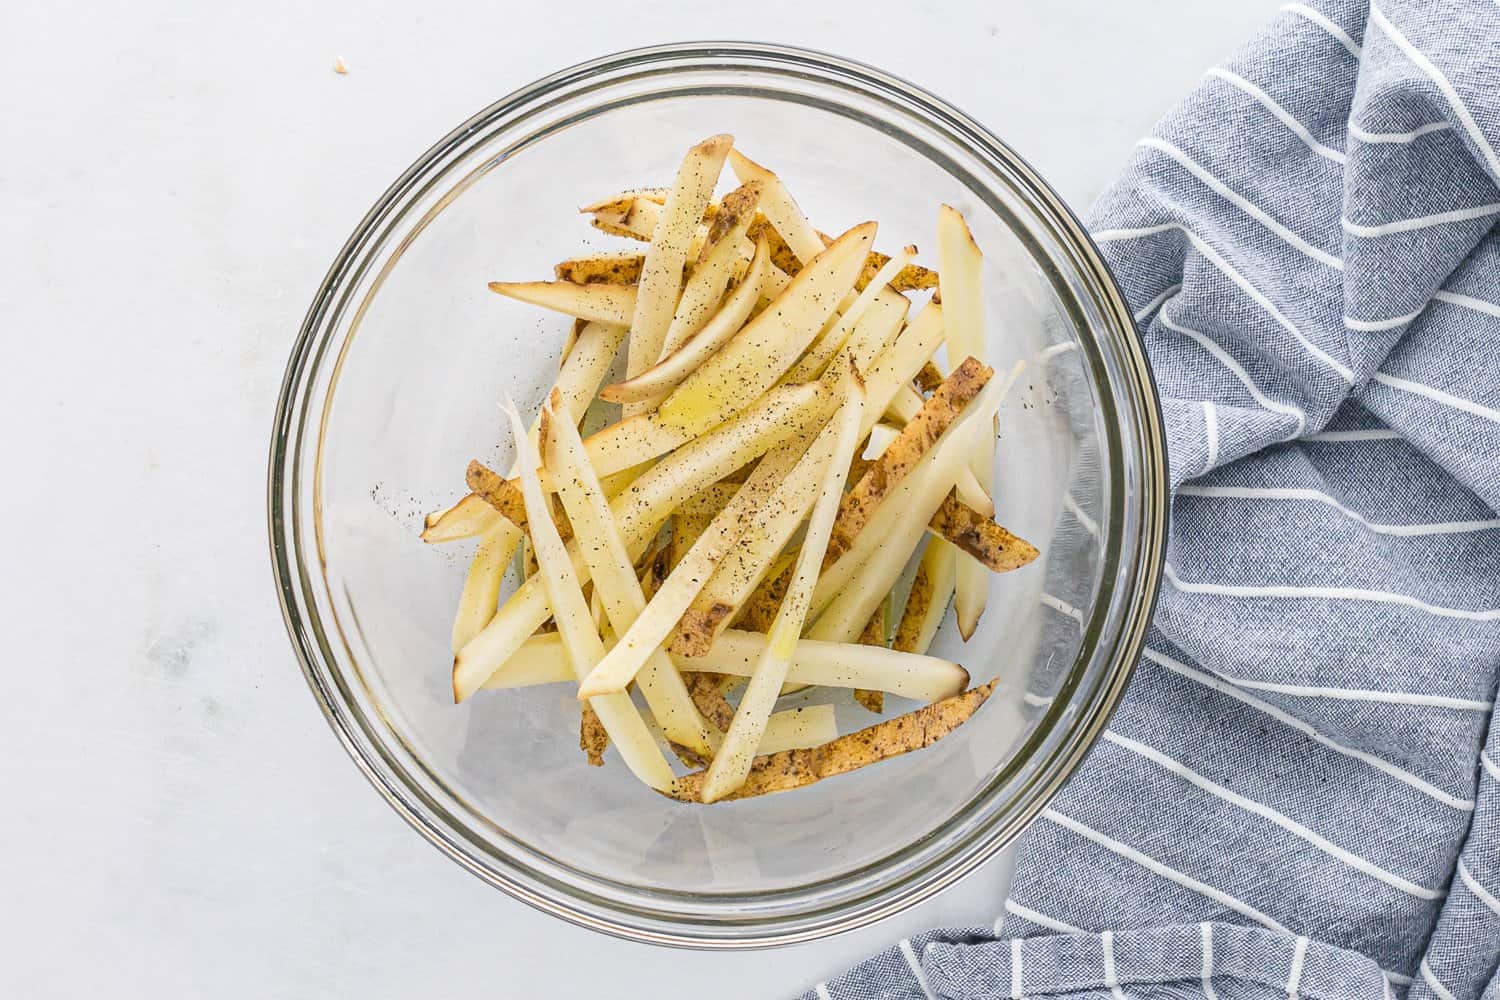 Uncooked fries with seasoning.